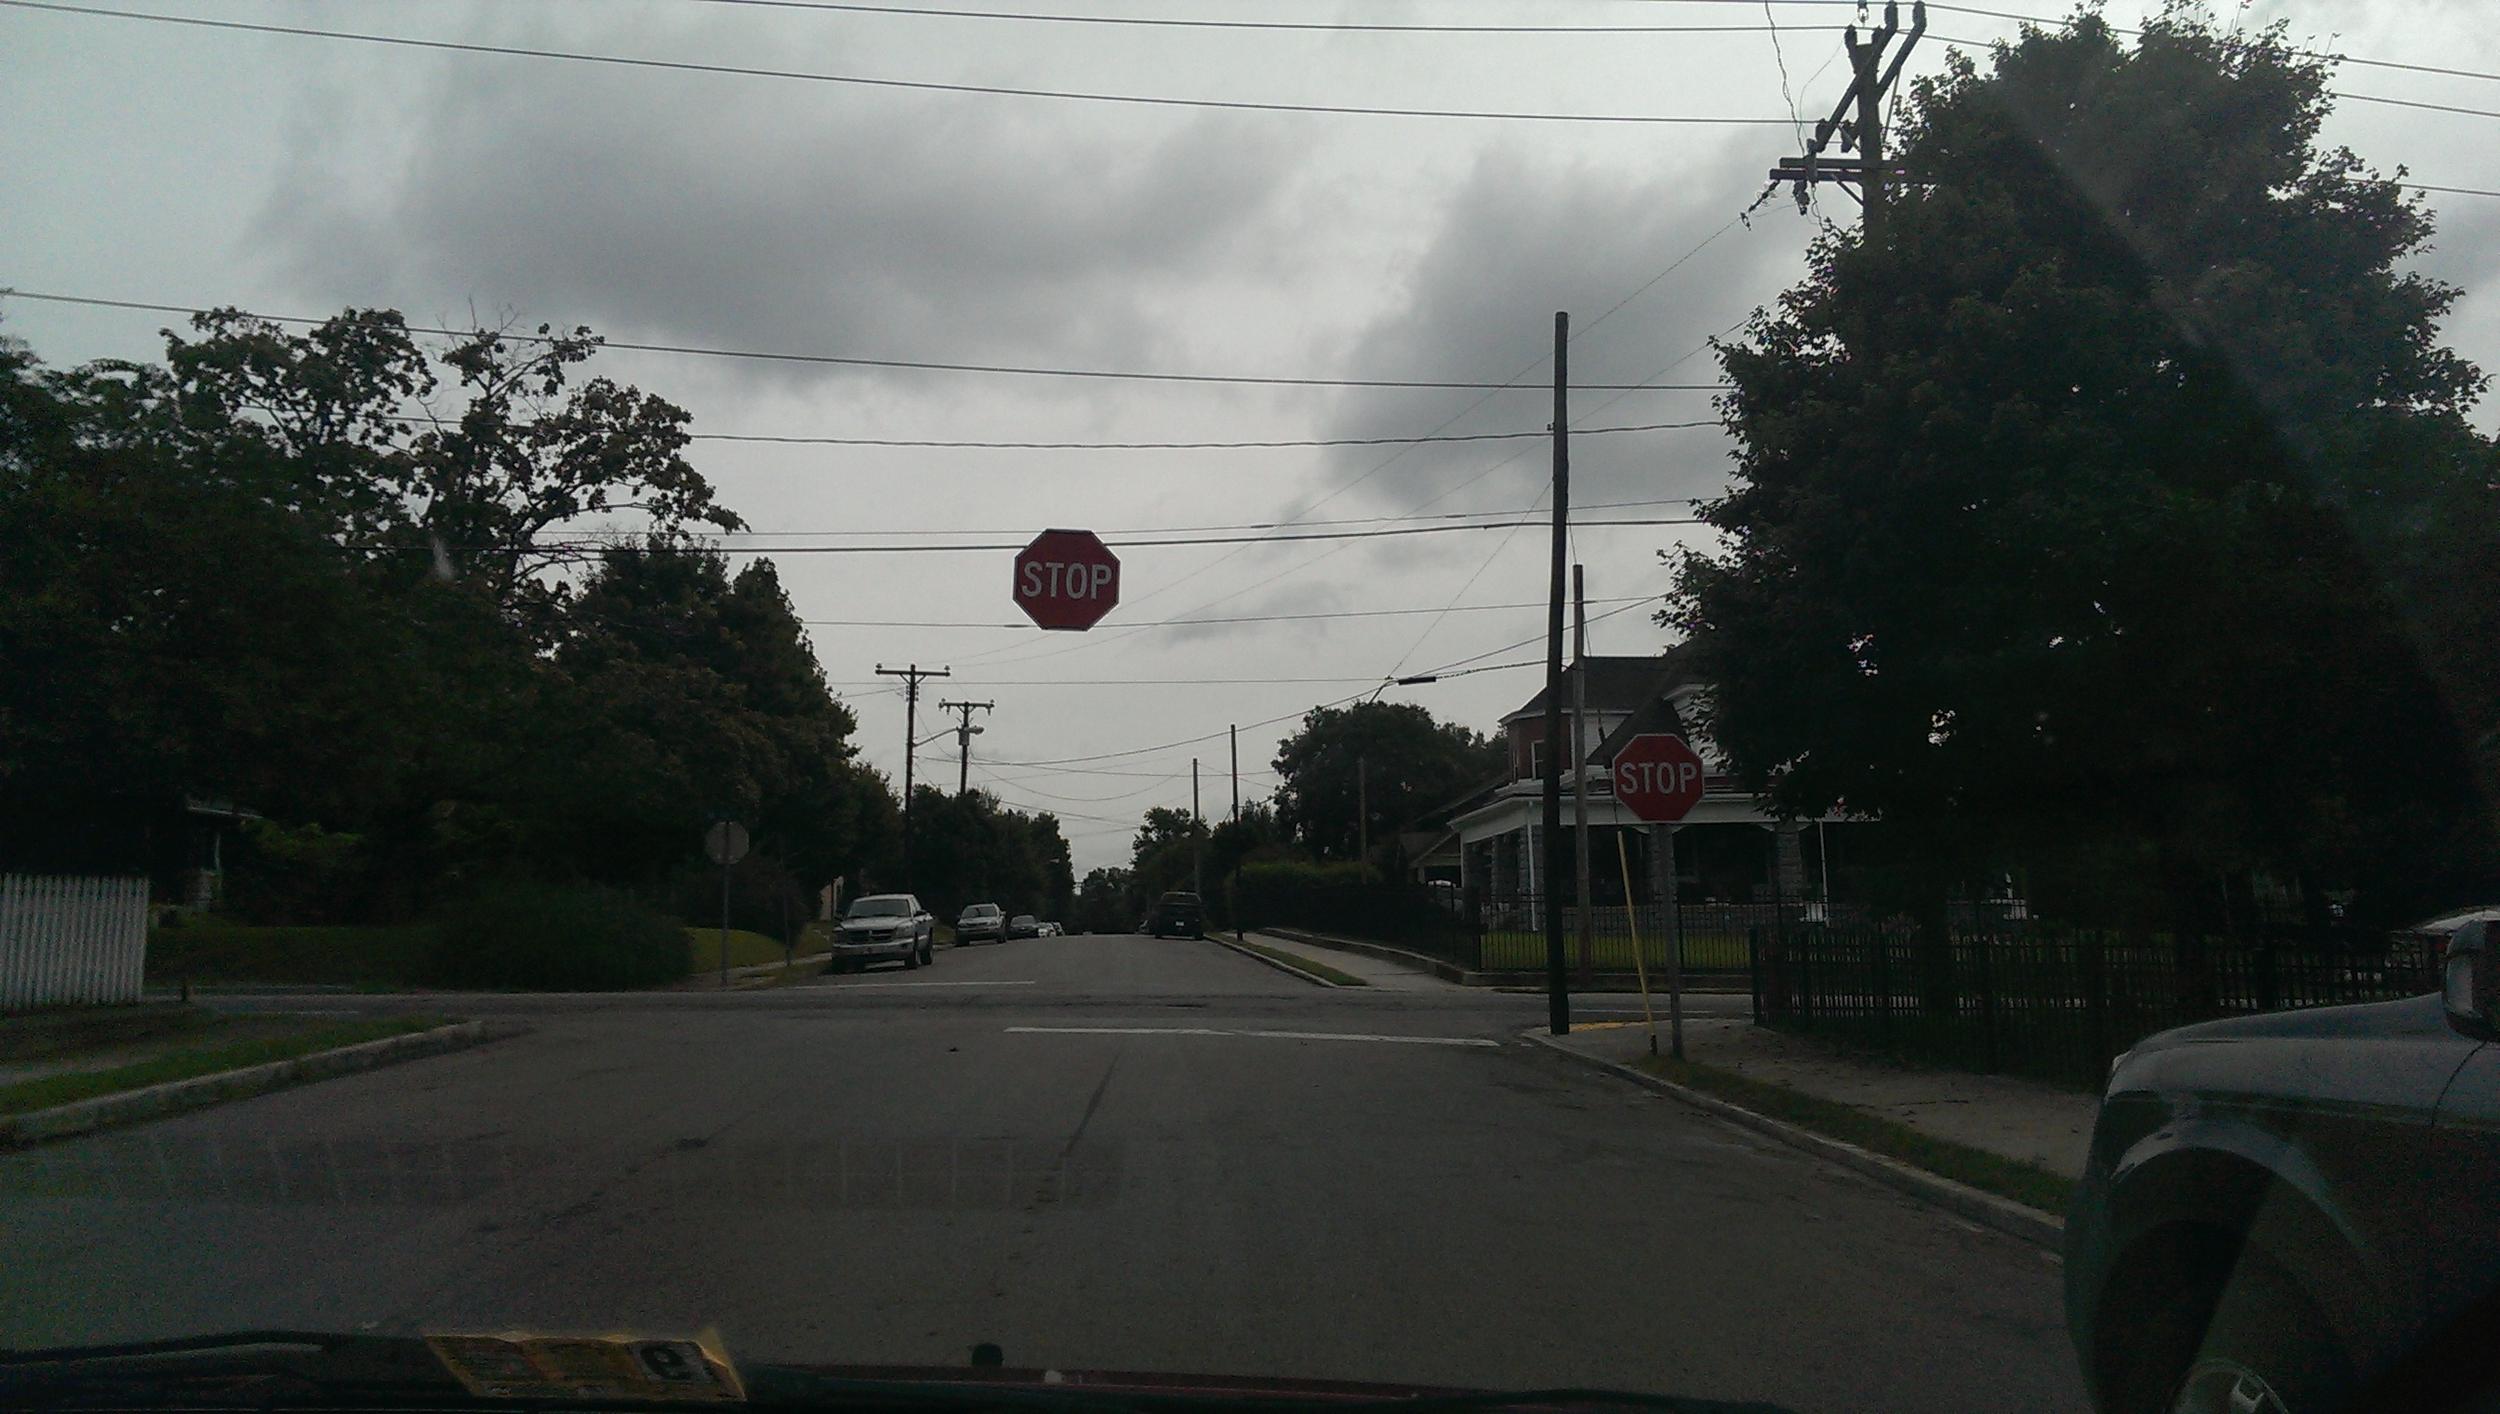 In hipster neighborhoods, the stop signs are trying to float away.